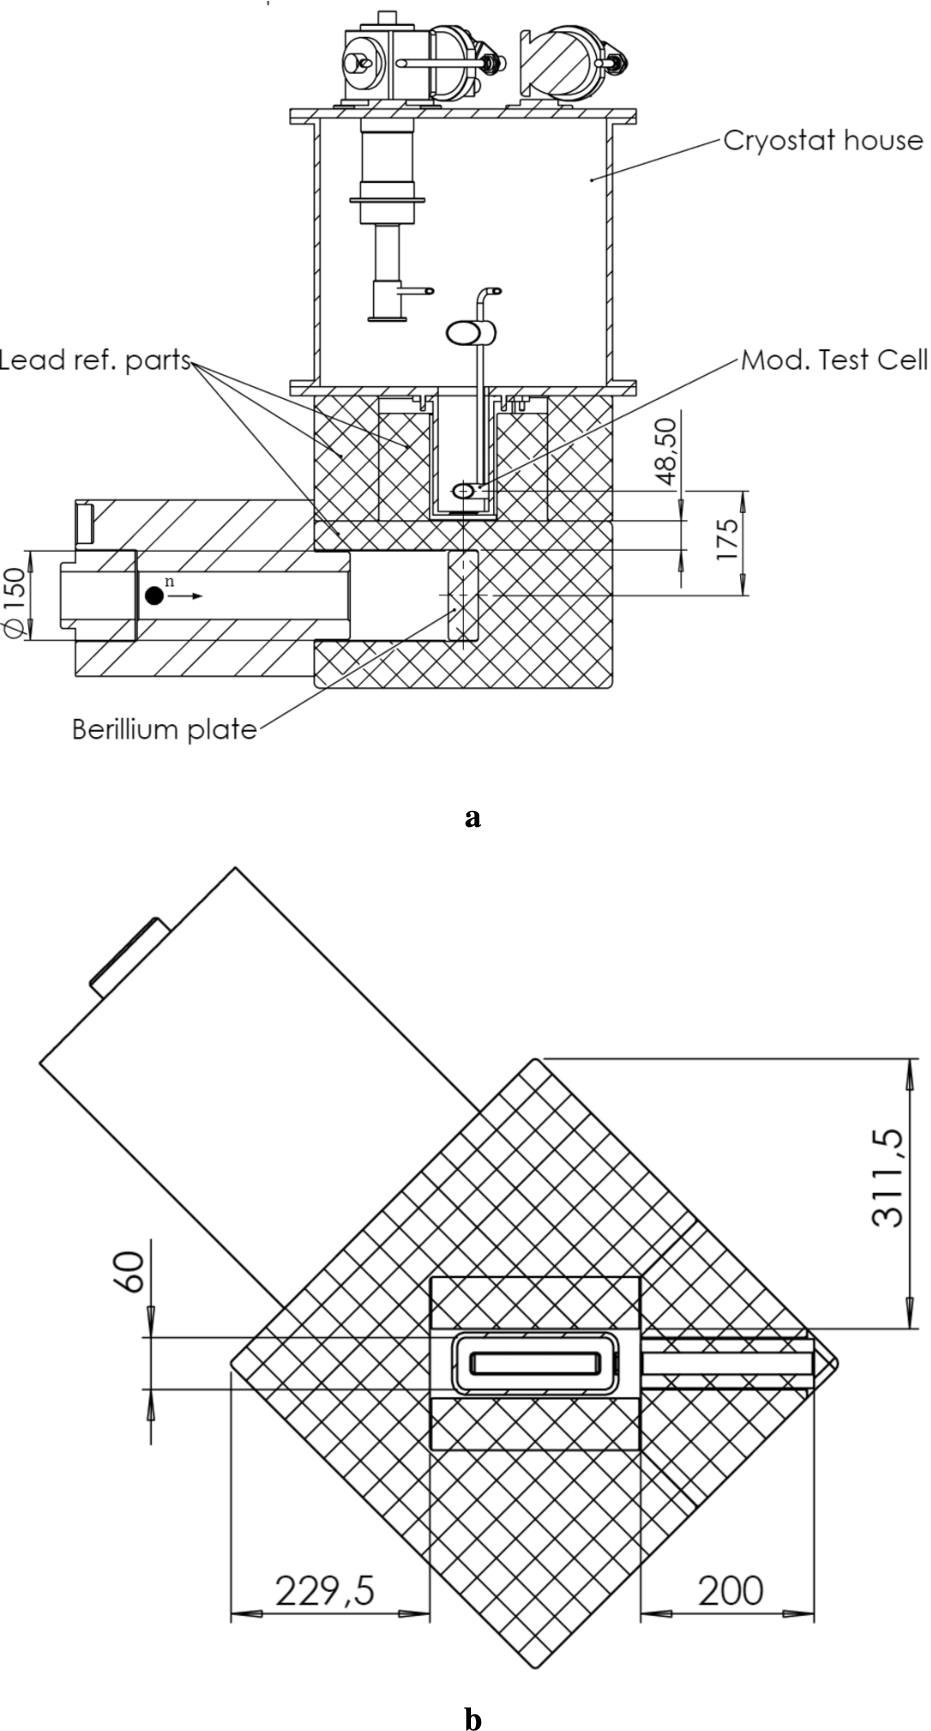 Section drawings of the lead reflector-moderator block at the CMTF. (A) vertical section (b) horizontal section at the height of the moderator vessel.